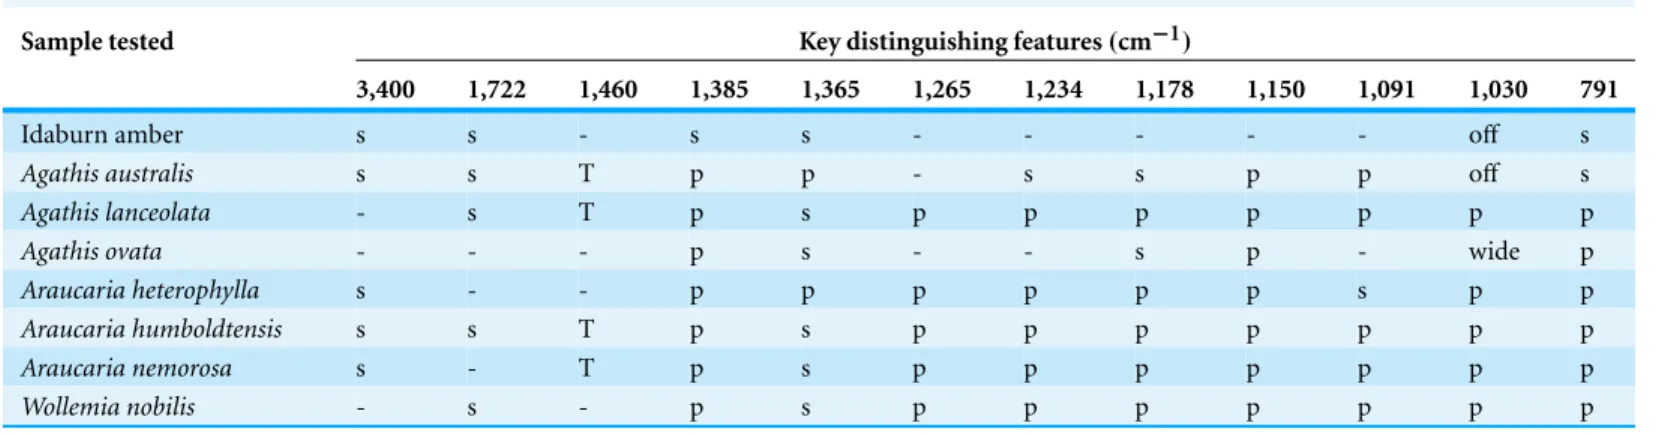 Table 2 Distinctive features of FTIR spectra summarized allowing sample differentiation.